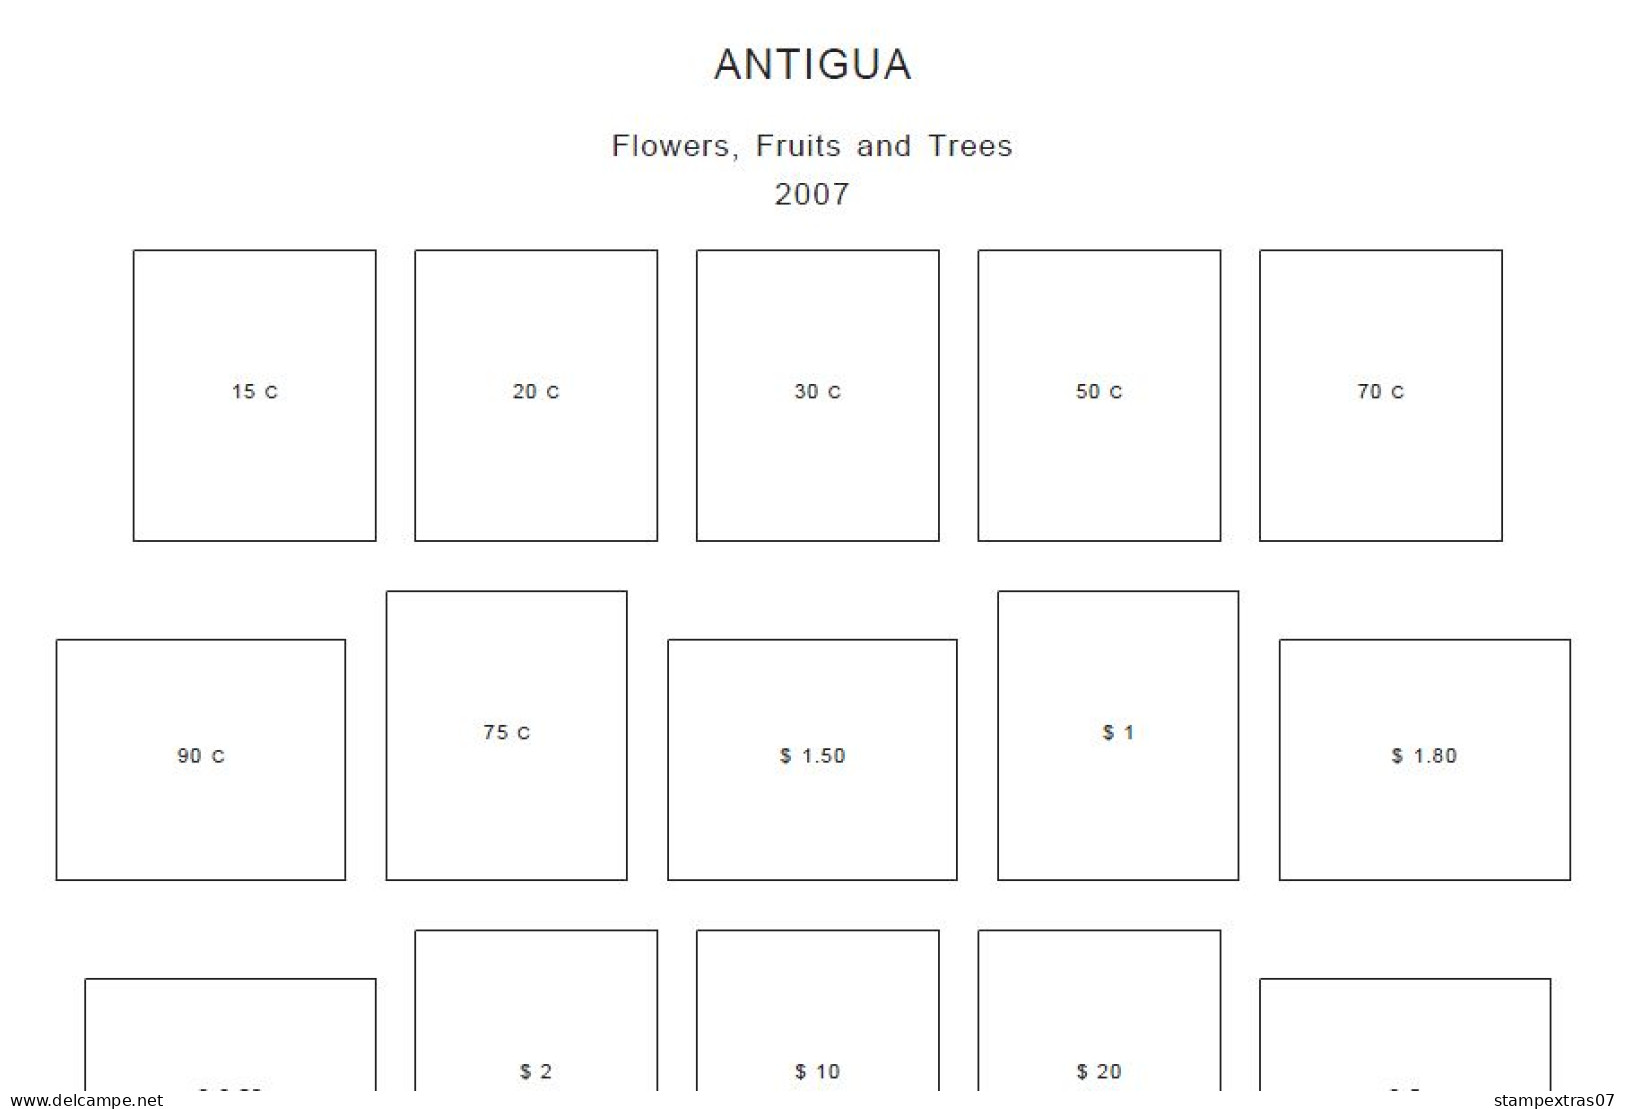 ANTIGUA STAMP ALBUM PAGES 1862-2011 (980 pages)